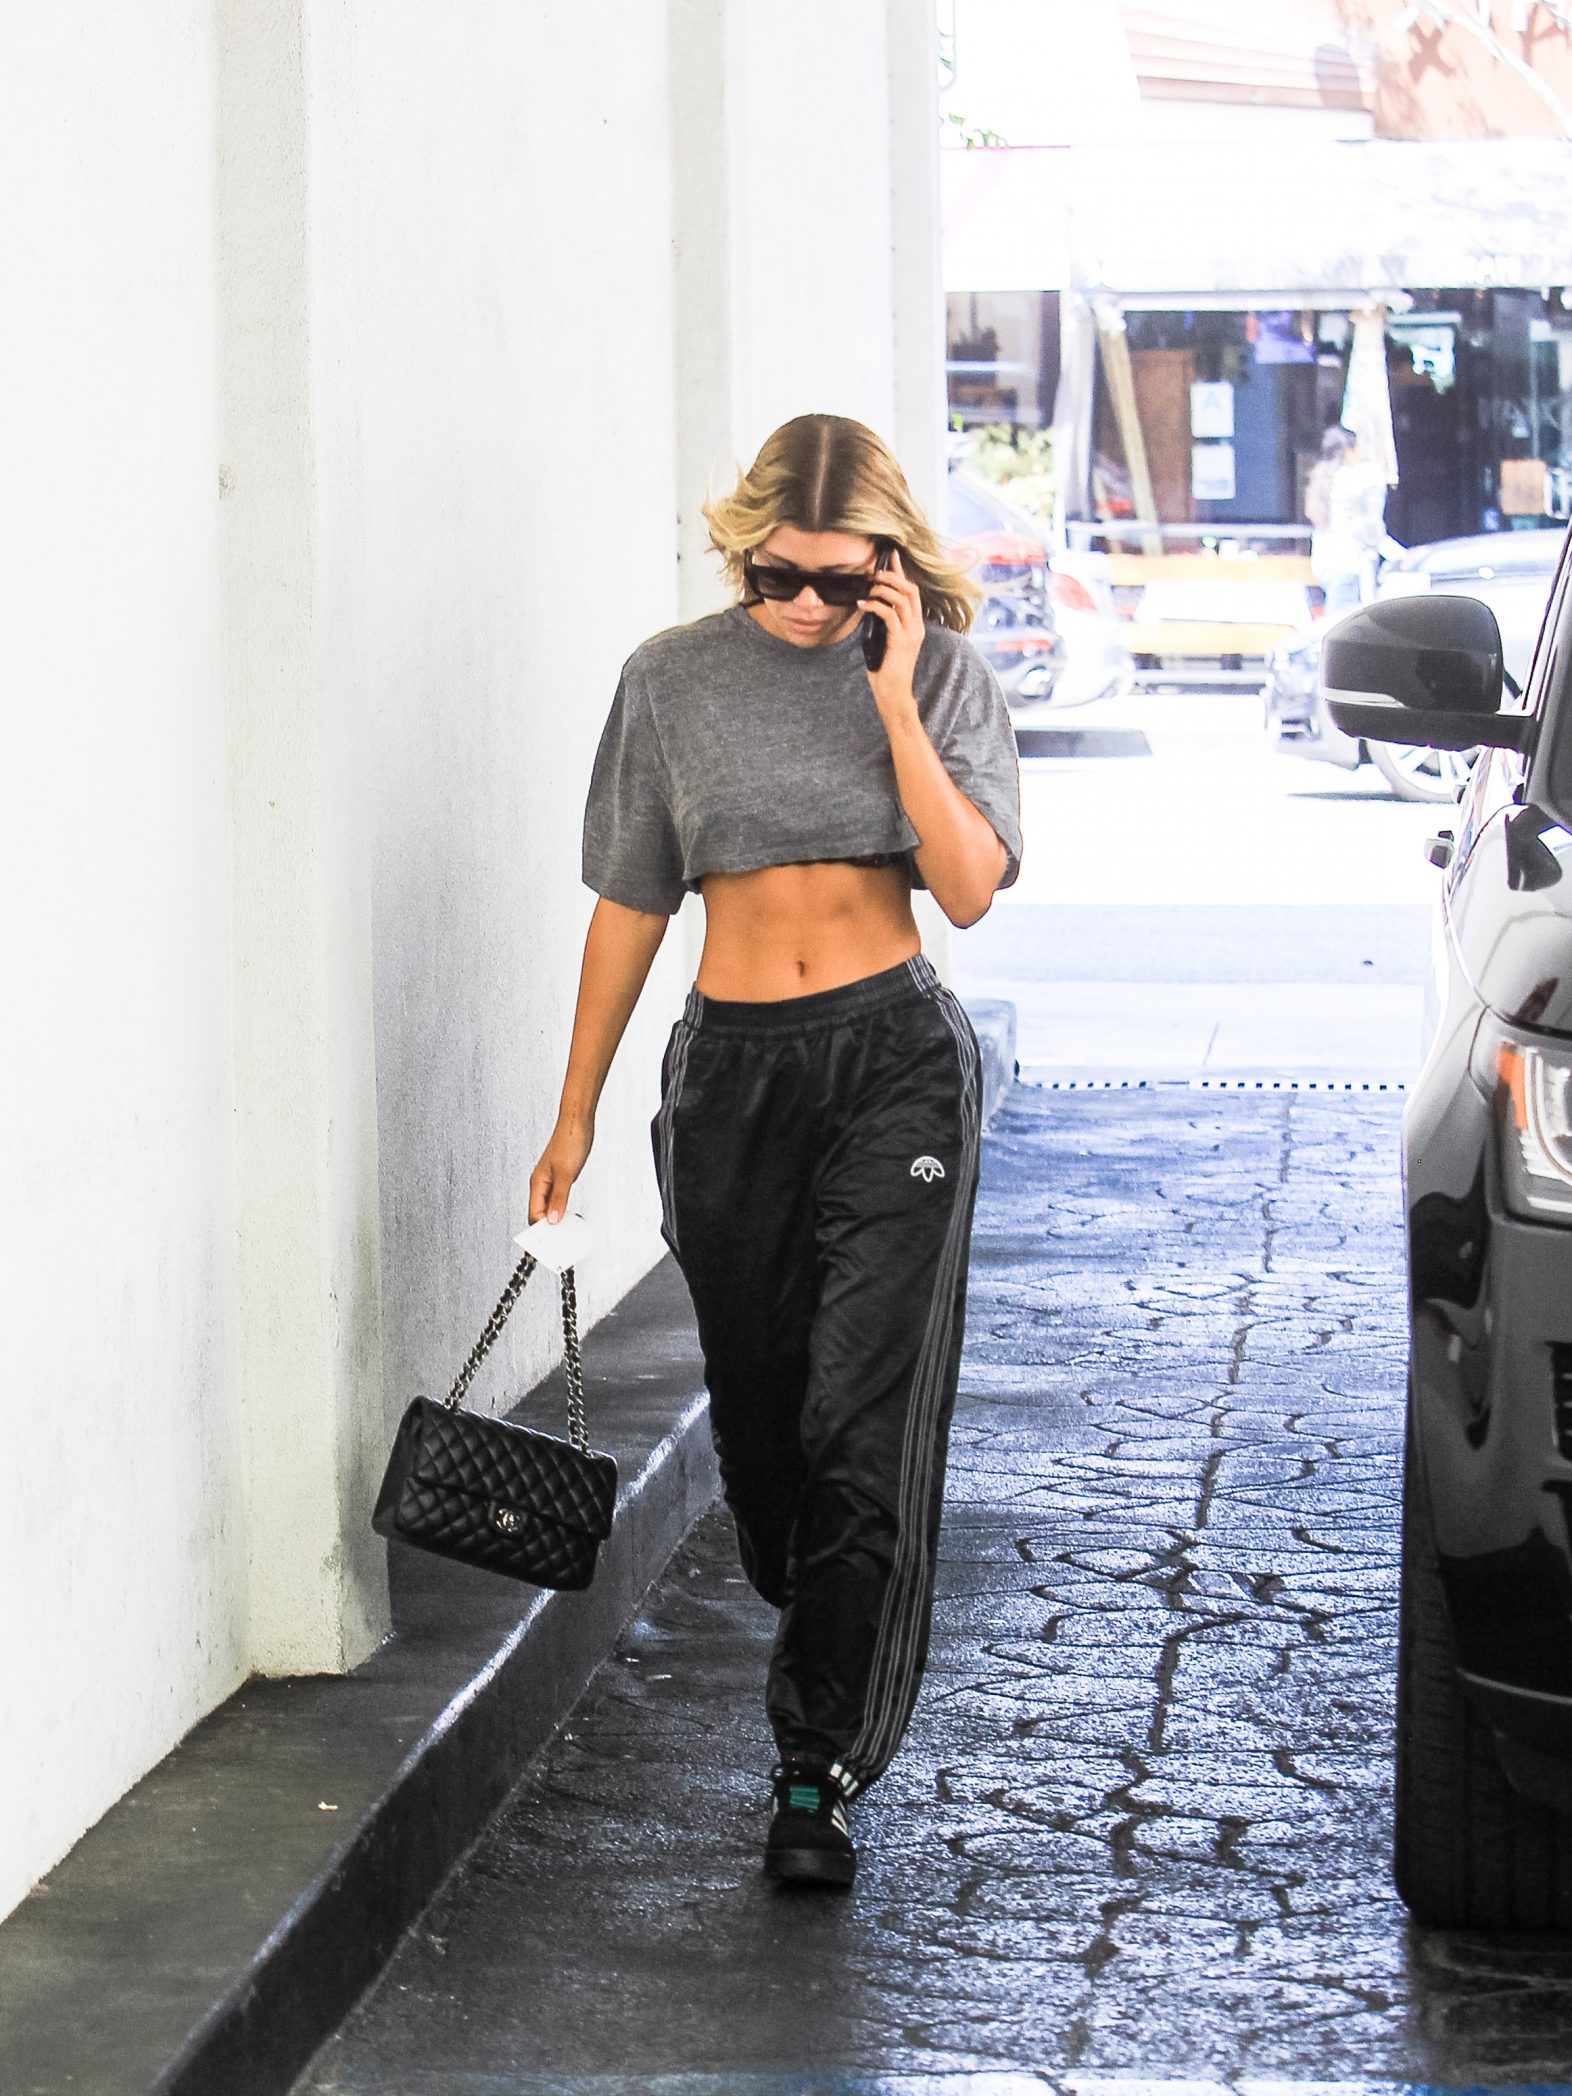 Sofia Richie dresses casual in her sweats while enjoying a walk on